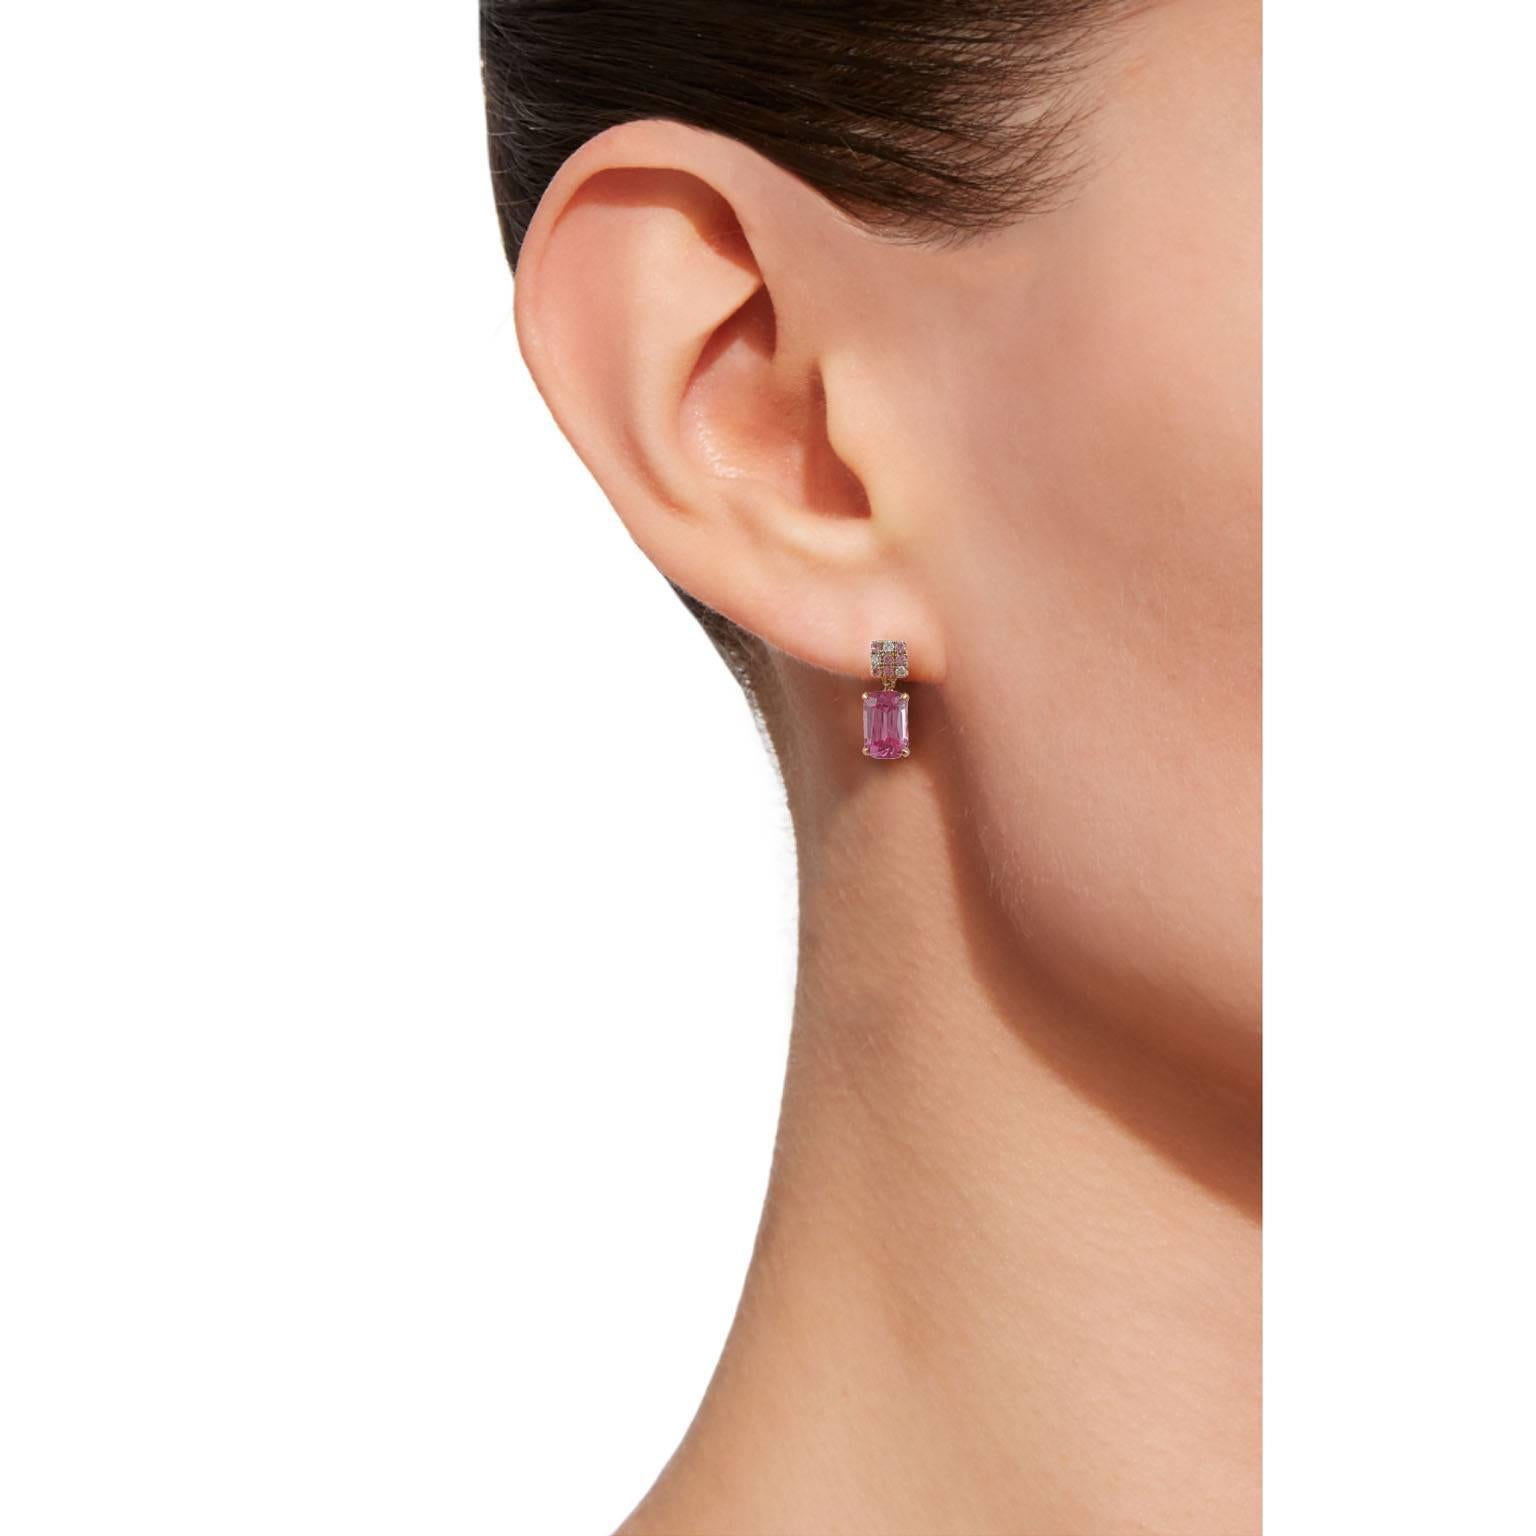 Jona design collection, hand crafted in Italy, 18 karat pink gold earrings featuring a pair of oblong pink spinels weighing 2.26 carats in total, suspended from a Pink Sapphire (0.12 ct) and diamond (0.05 ct) pavé cushions.
All Jona jewelry is new